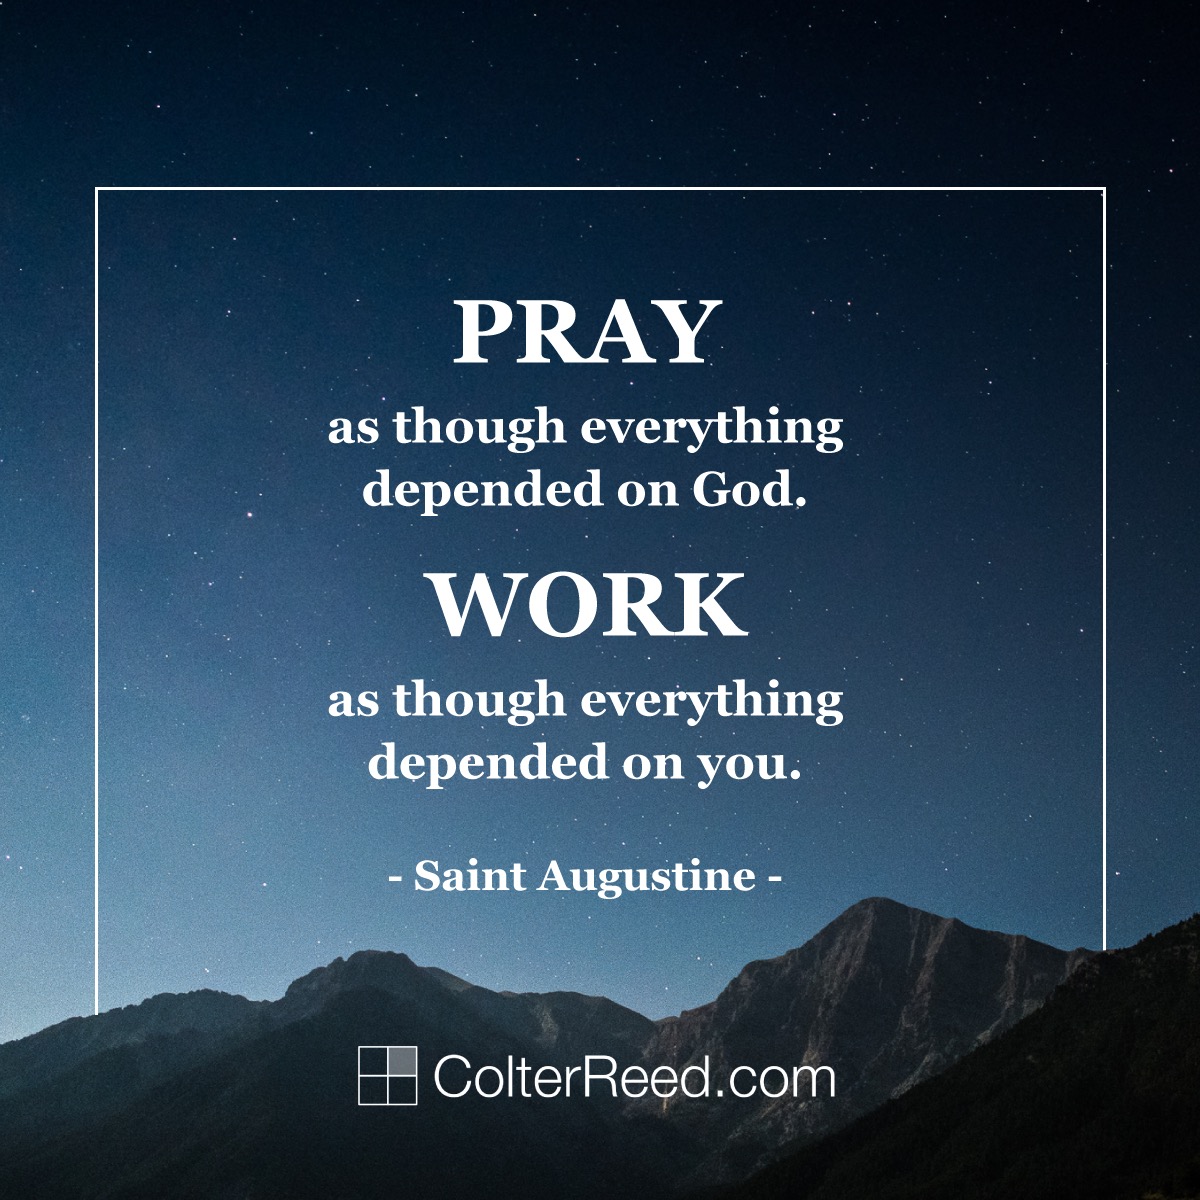 Pray as though everything depended on God. Work as though everything depended on you. —Saint Augustine